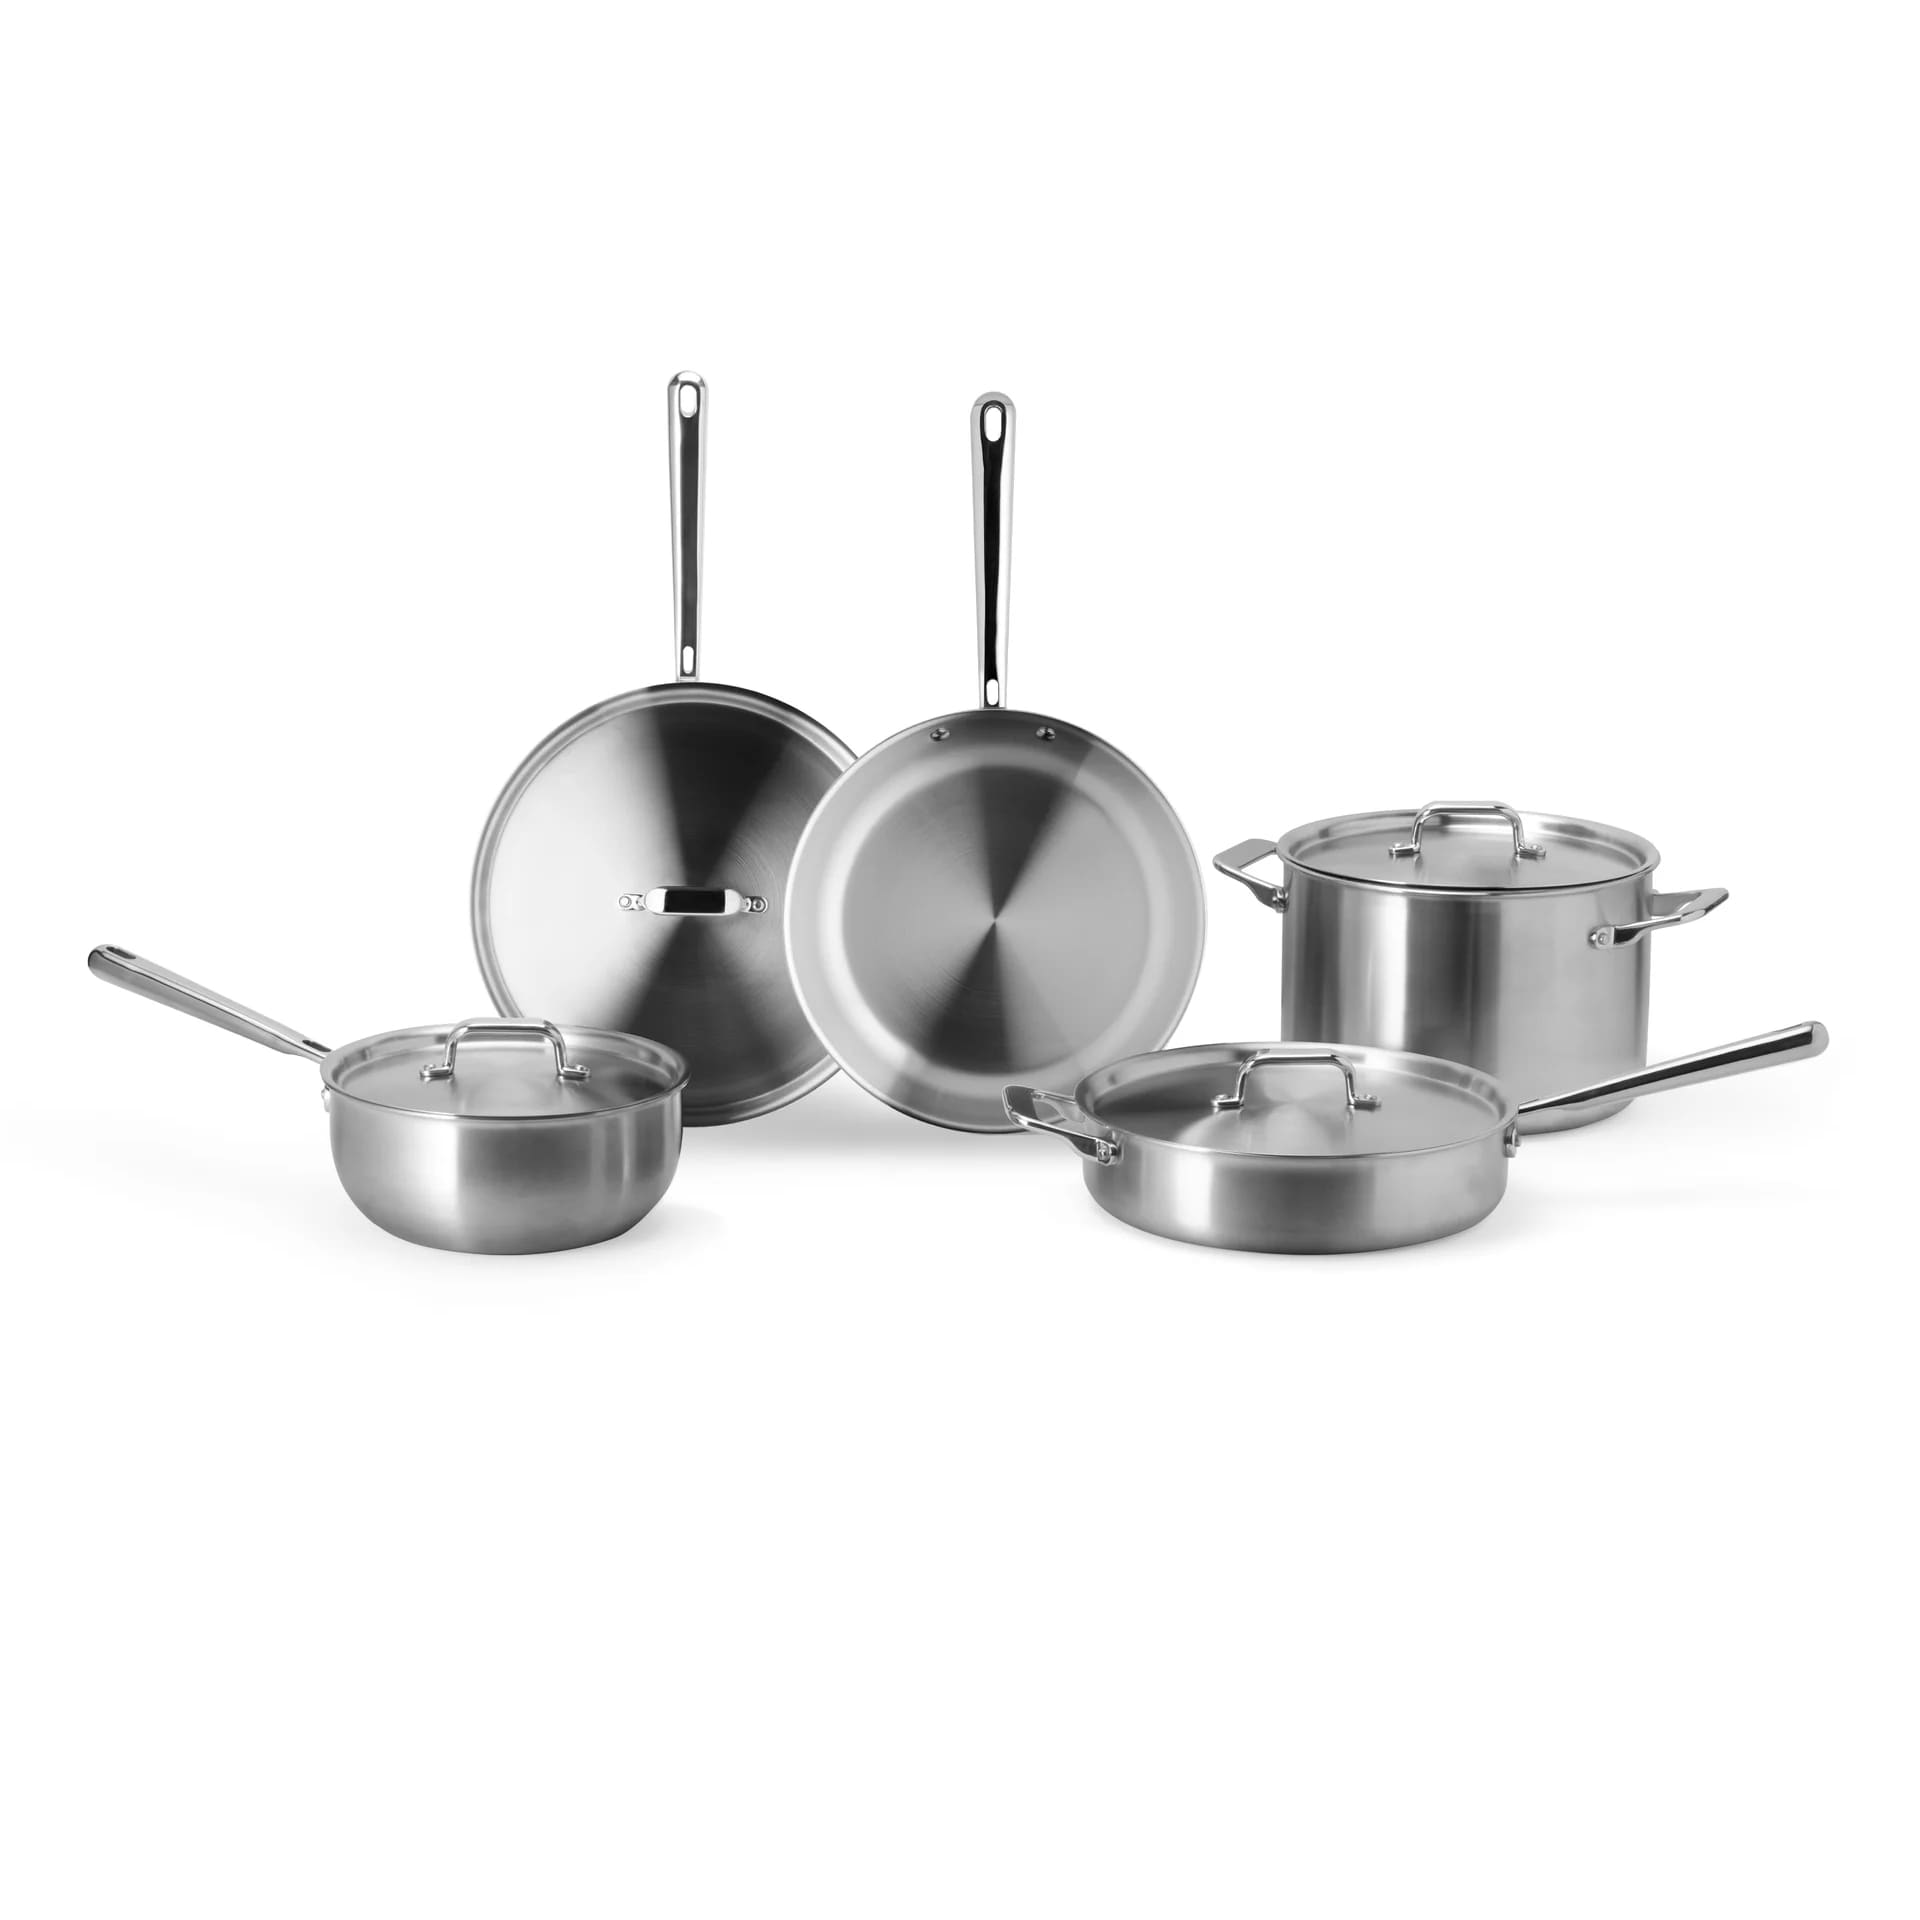 3 Direct-to-Consumer Stainless Steel Cookware Sets to Consider